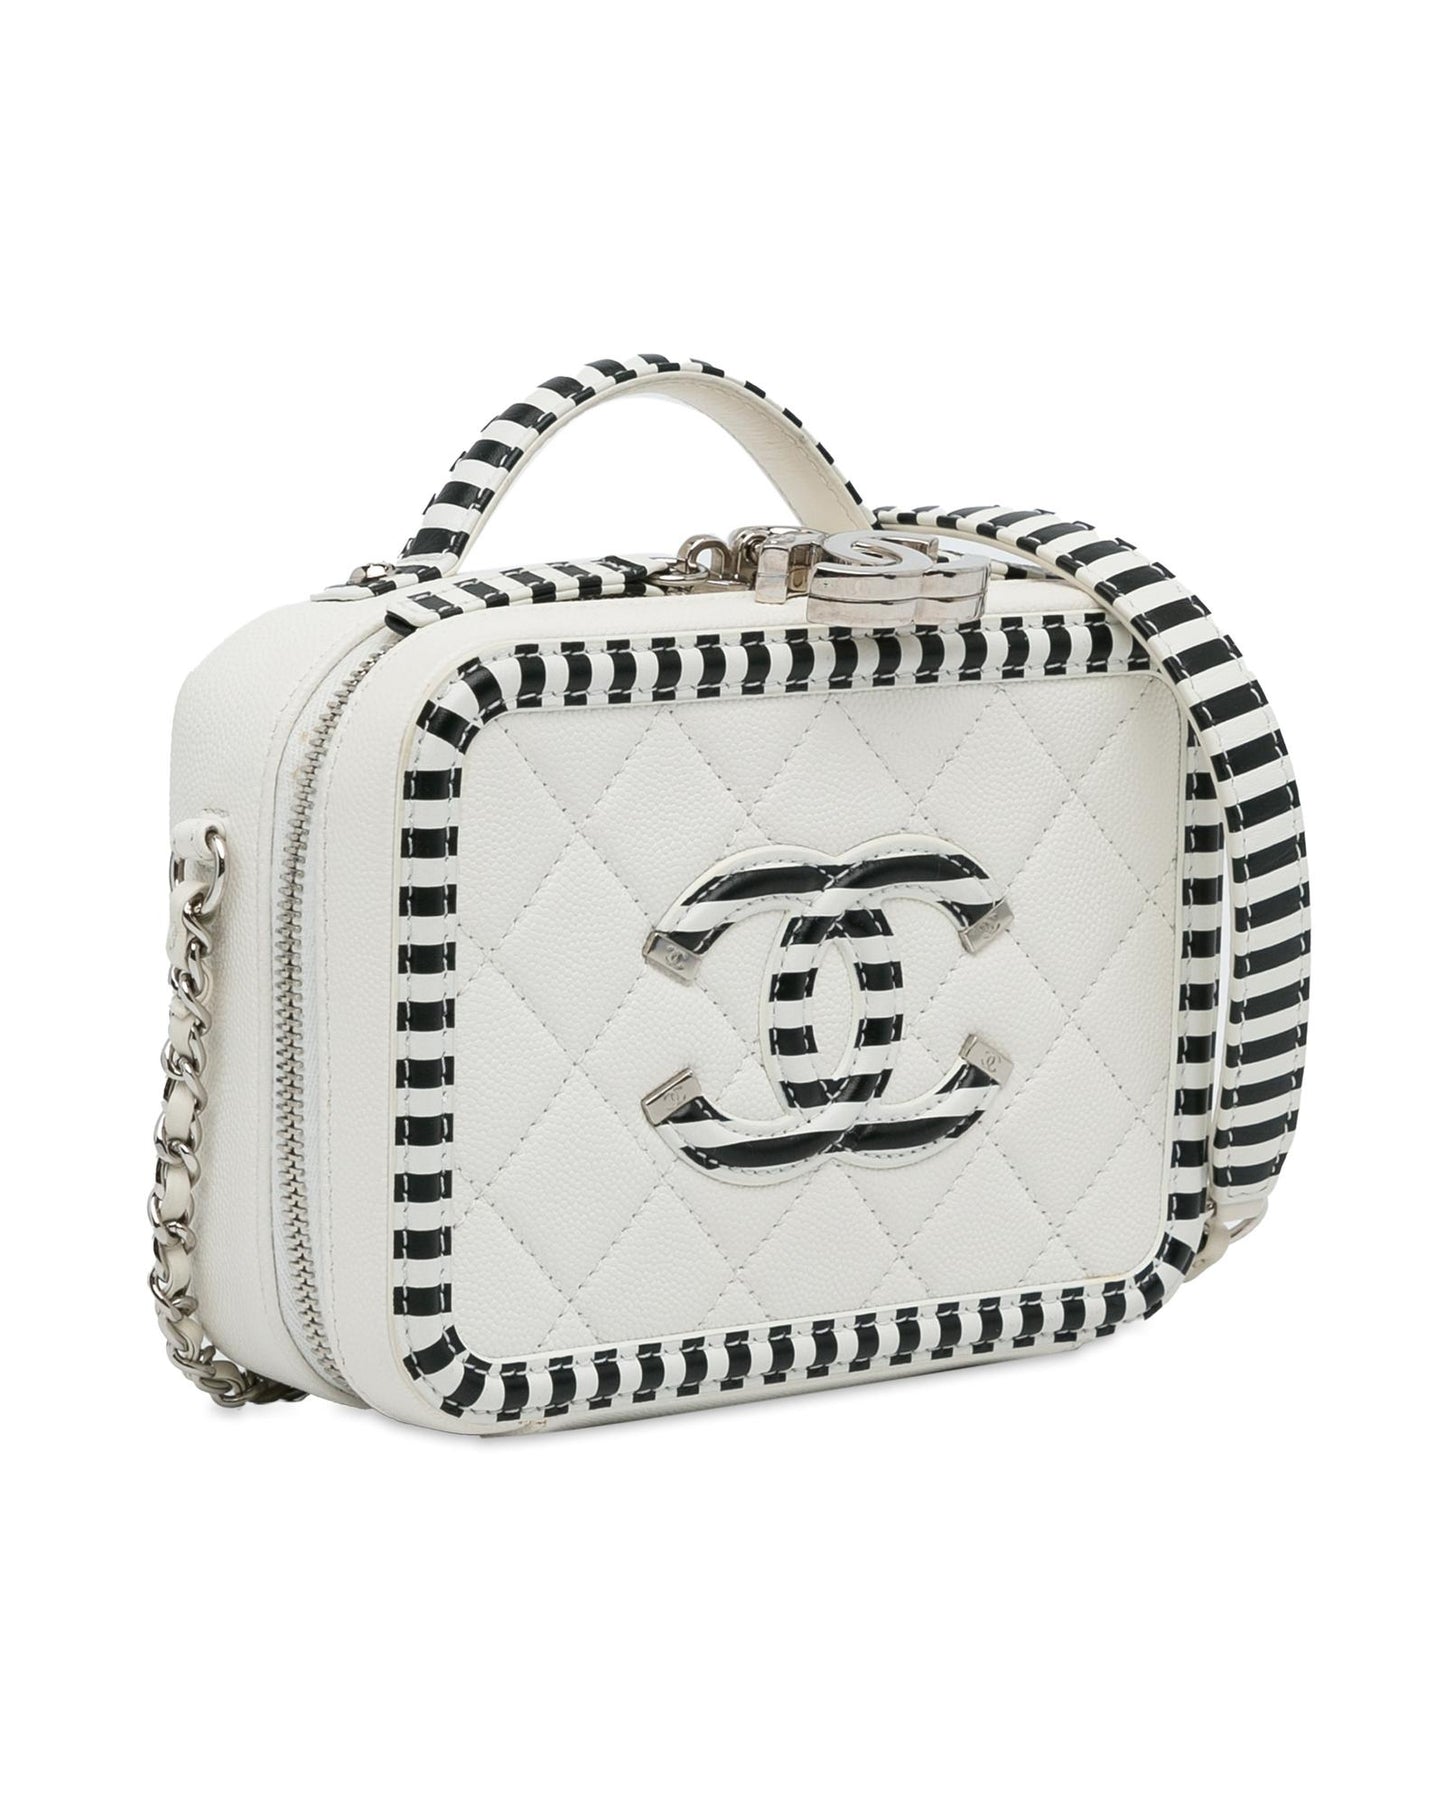 Chanel Women's Quilted Leather Vanity Bag with Woven Chain Strap in White